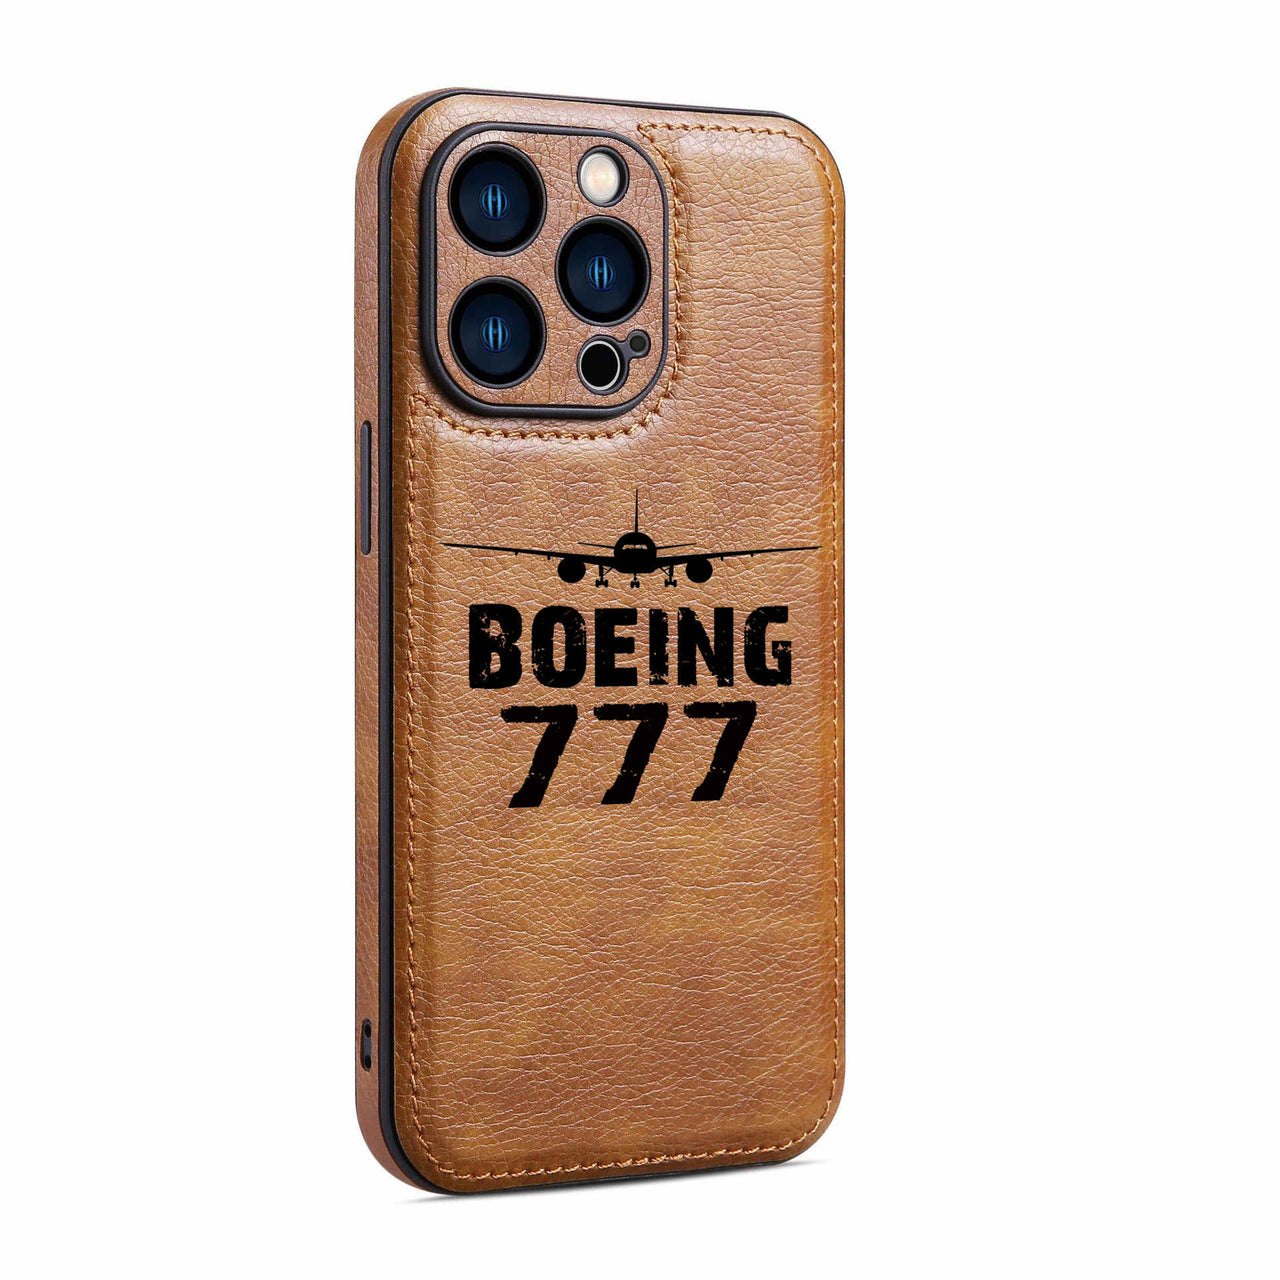 Boeing 777 & Plane Designed Leather iPhone Cases